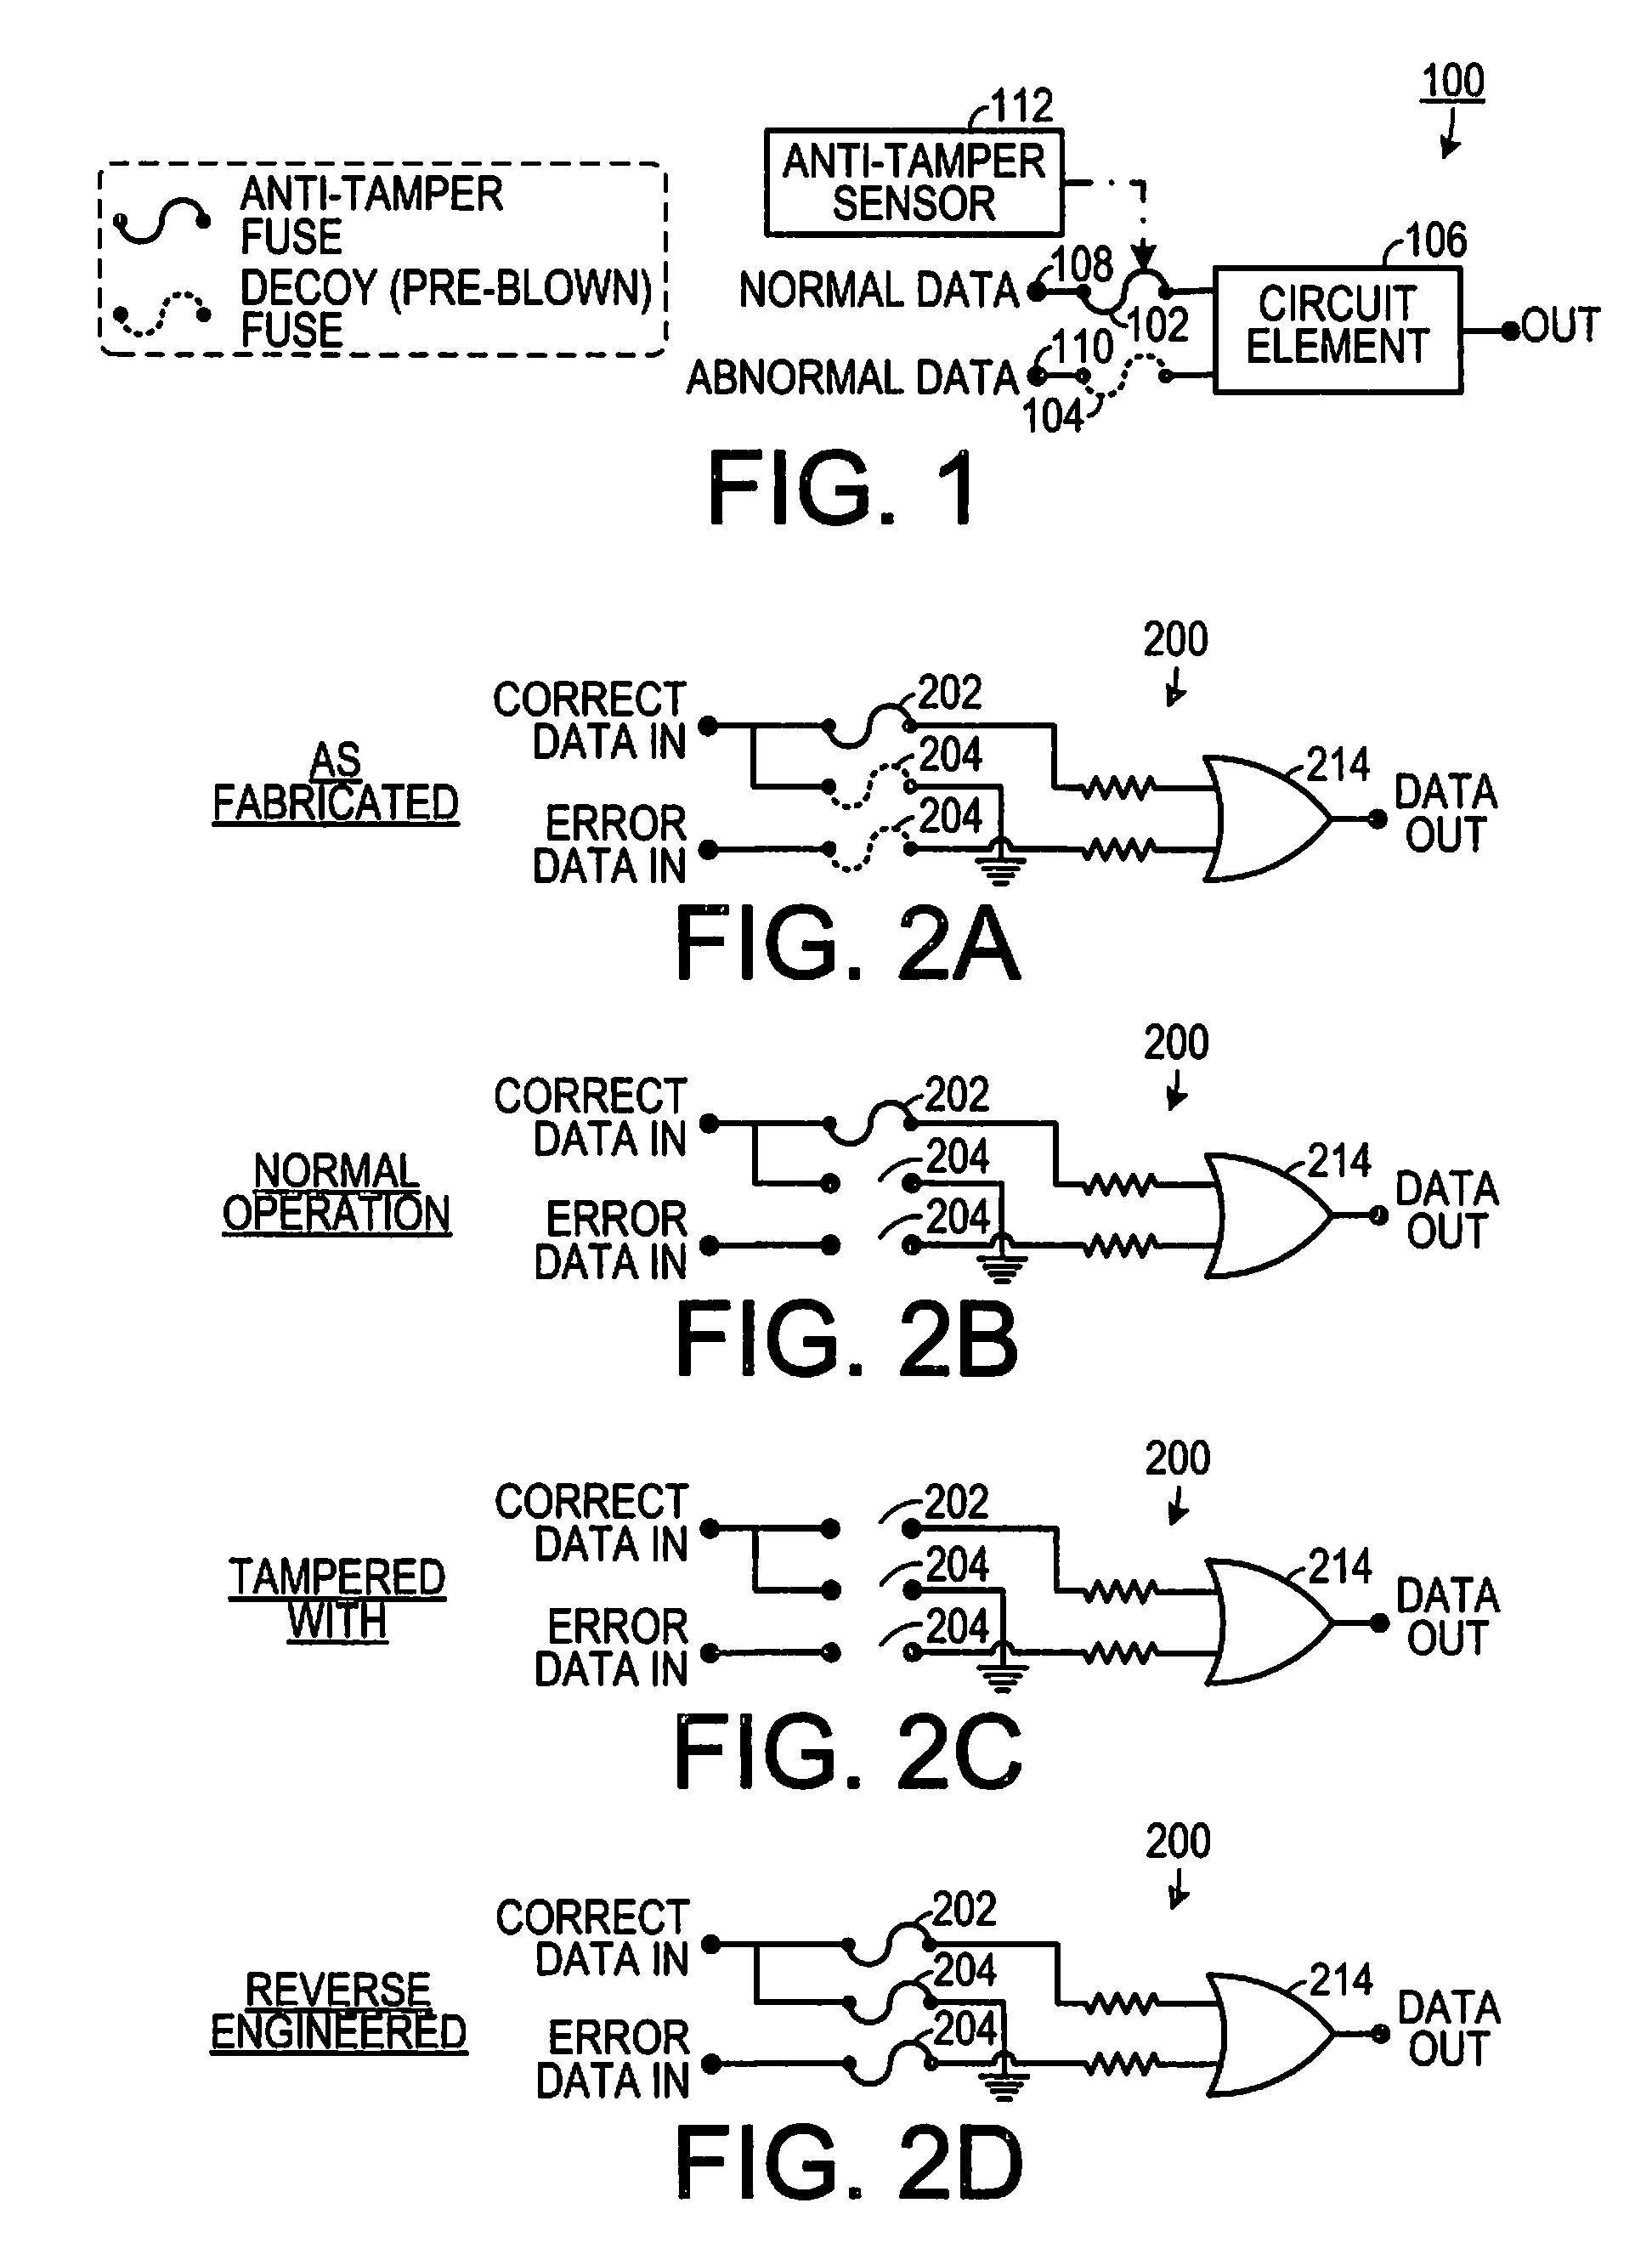 Anti-tamper electronic obscurity using E-fuse technology